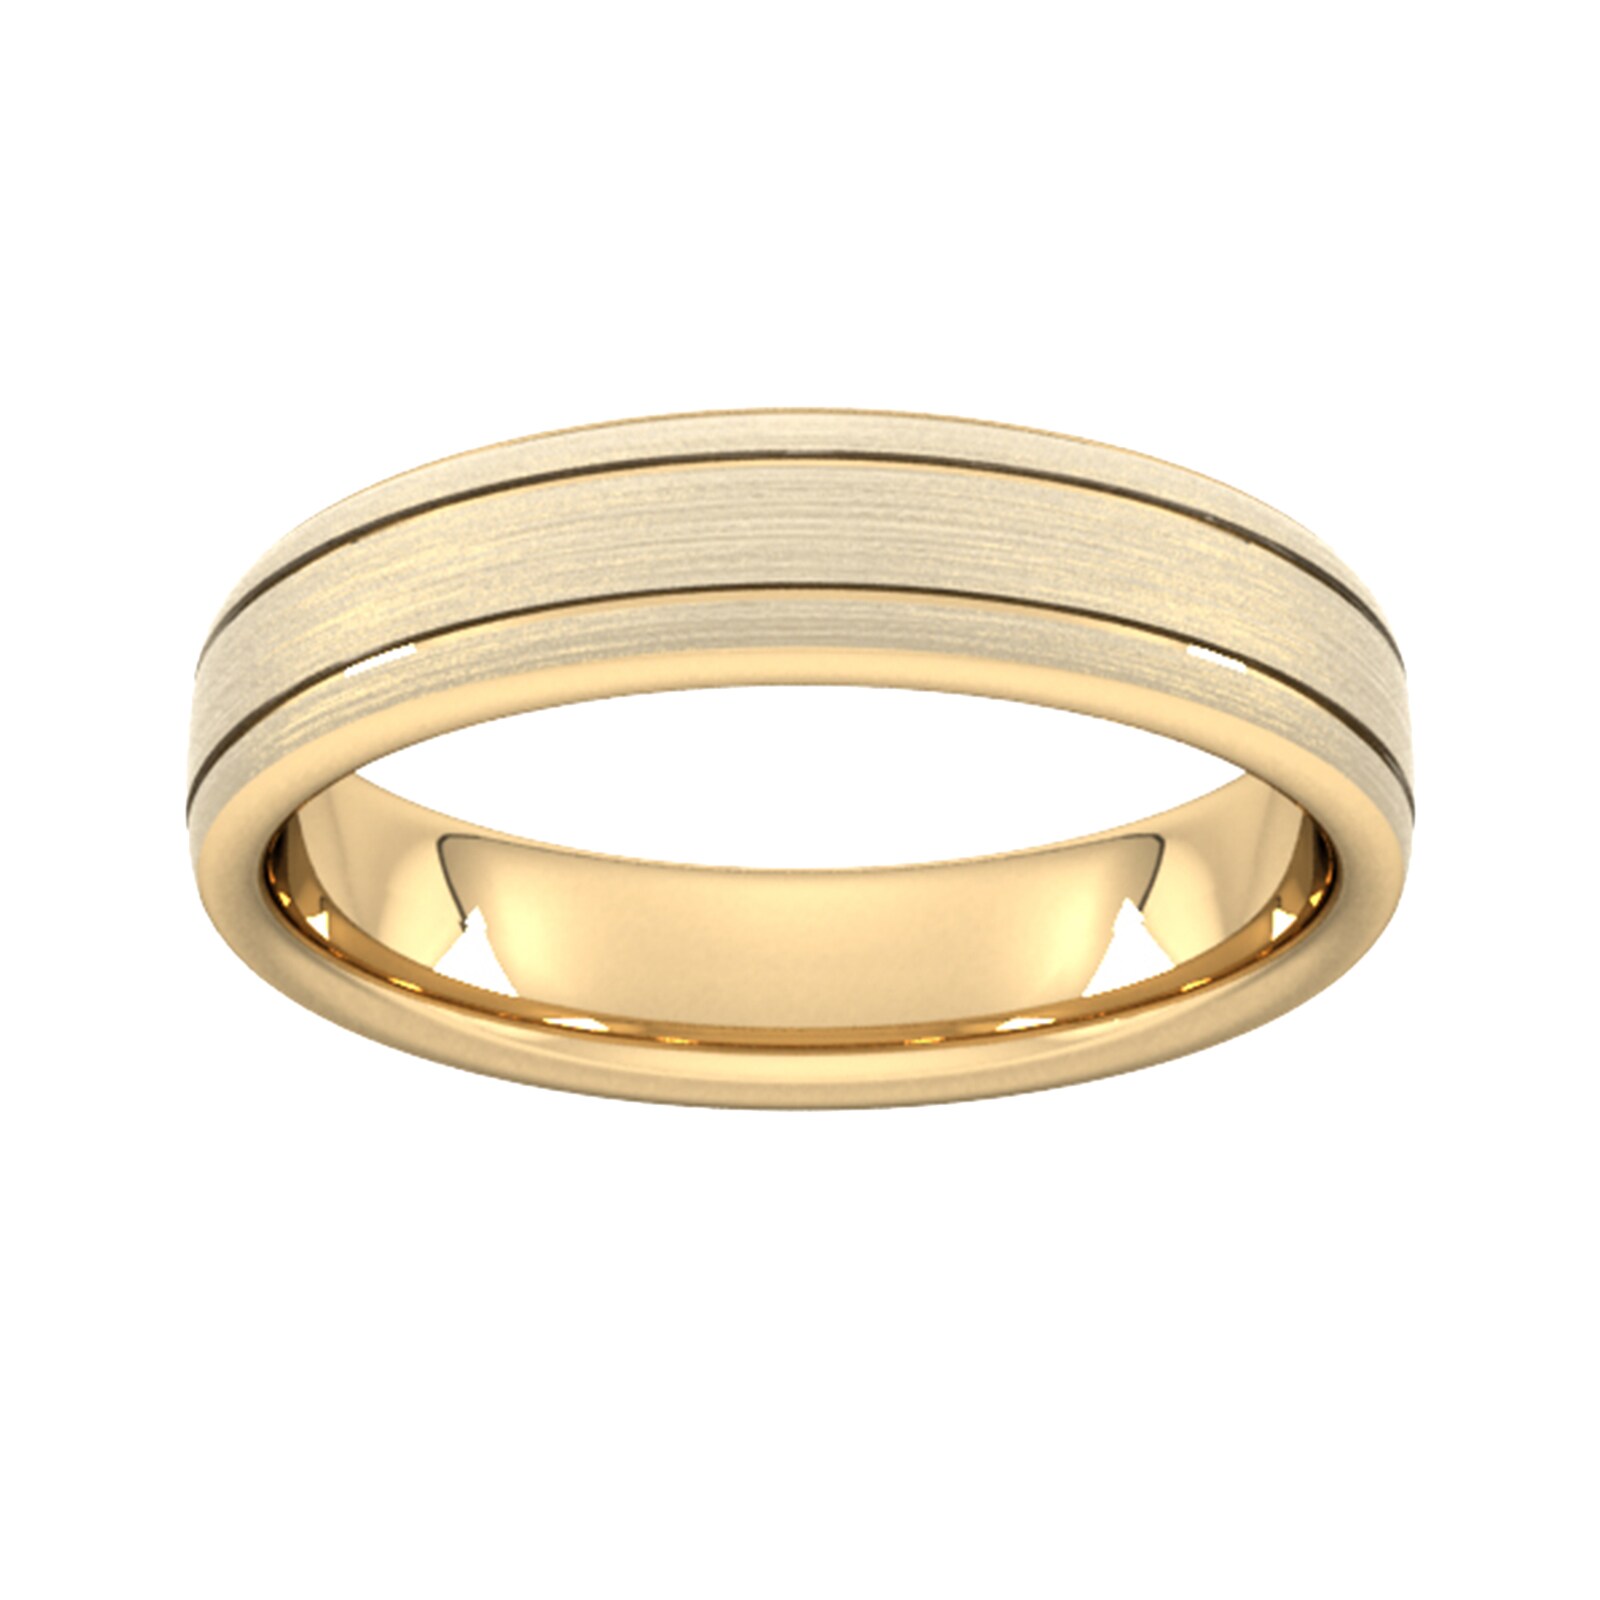 5mm Slight Court Heavy Matt Finish With Double Grooves Wedding Ring In 18 Carat Yellow Gold - Ring Size S